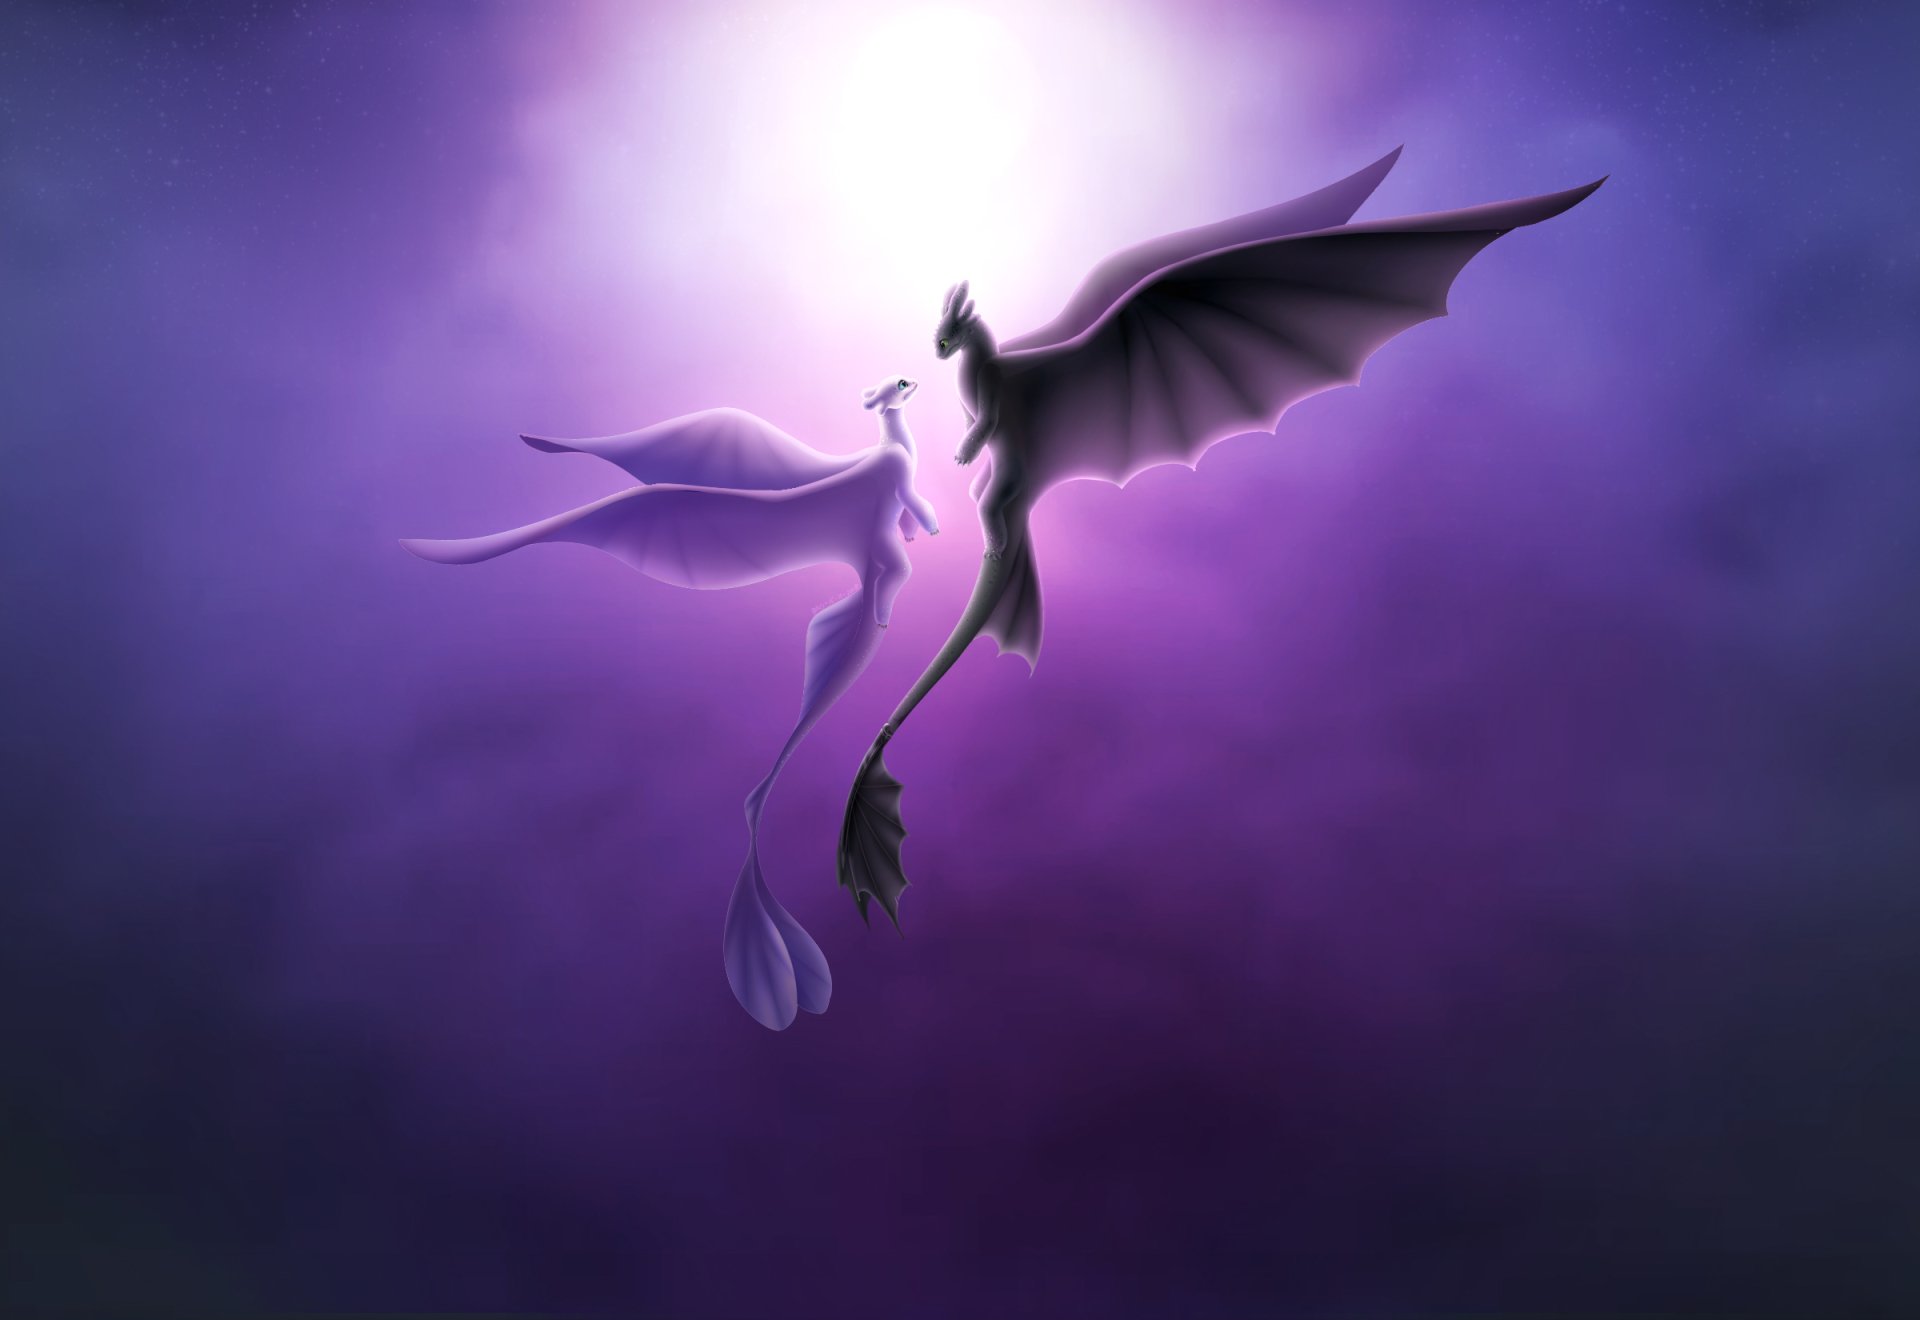 how to train your dragon hd wallpaper,purple,violet,wing,sky,fictional character